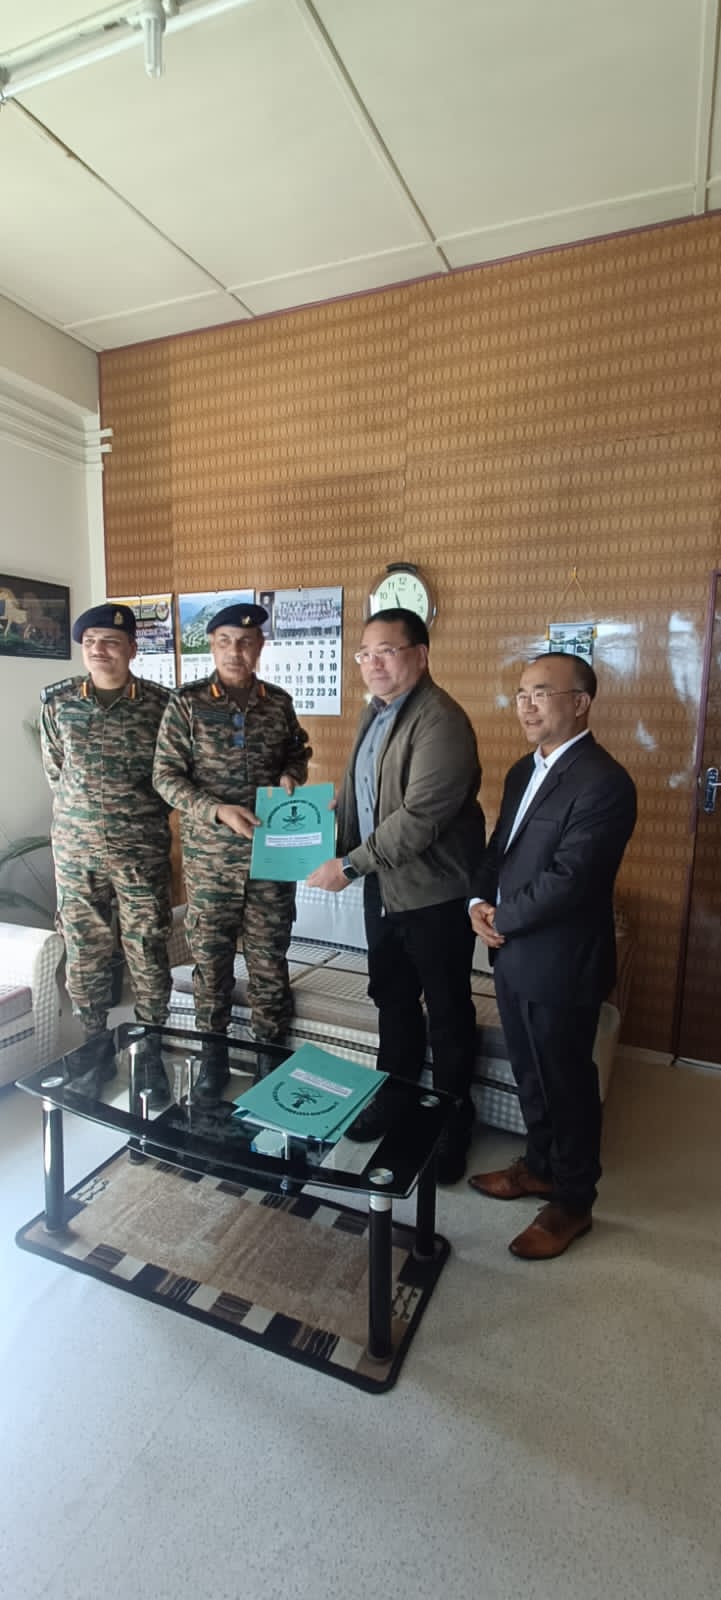 INDIAN ARMY SIGNS MEMORANDUM OF AGREEMENT WITH MIZORAM STATE CANCER INSTITUTE (MSCI) FOR CANCER TREATMENT TO EX-SERVICEMEN CONTRIBUTORY HEALTH SCHEME (ECHS) BENEFICIARIES OF MIZORAM.